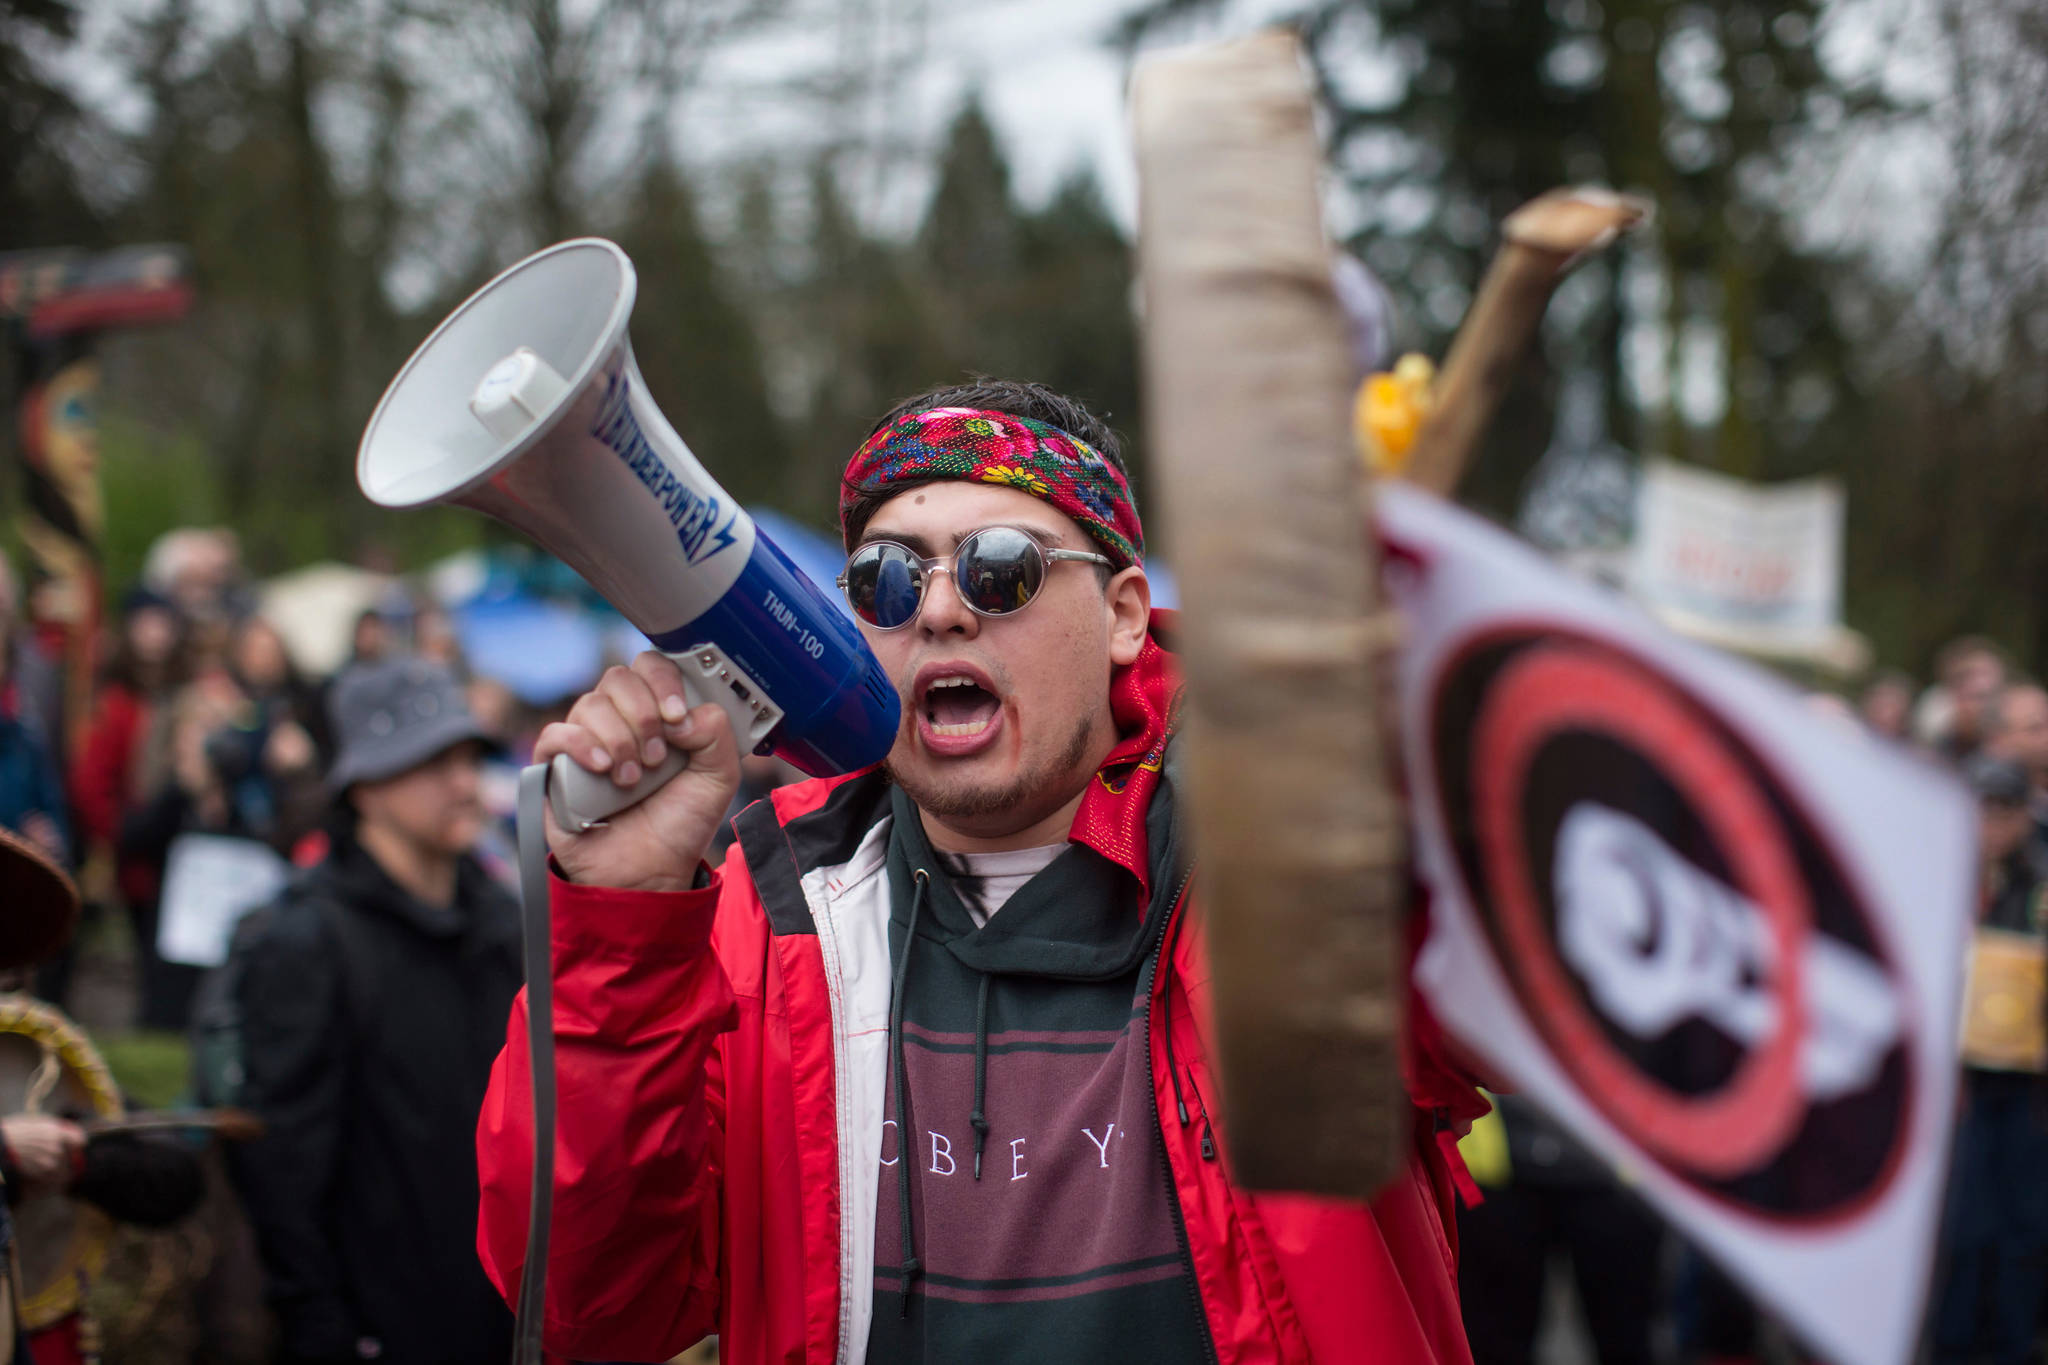 Cedar George-Parker addresses a crowd of protesters opposed to Kinder Morgan’s plan on the Trans Mountain pipeline extension on April 7 in Burnaby, B.C. (Darryl Dyck/The Canadian Press via AP)